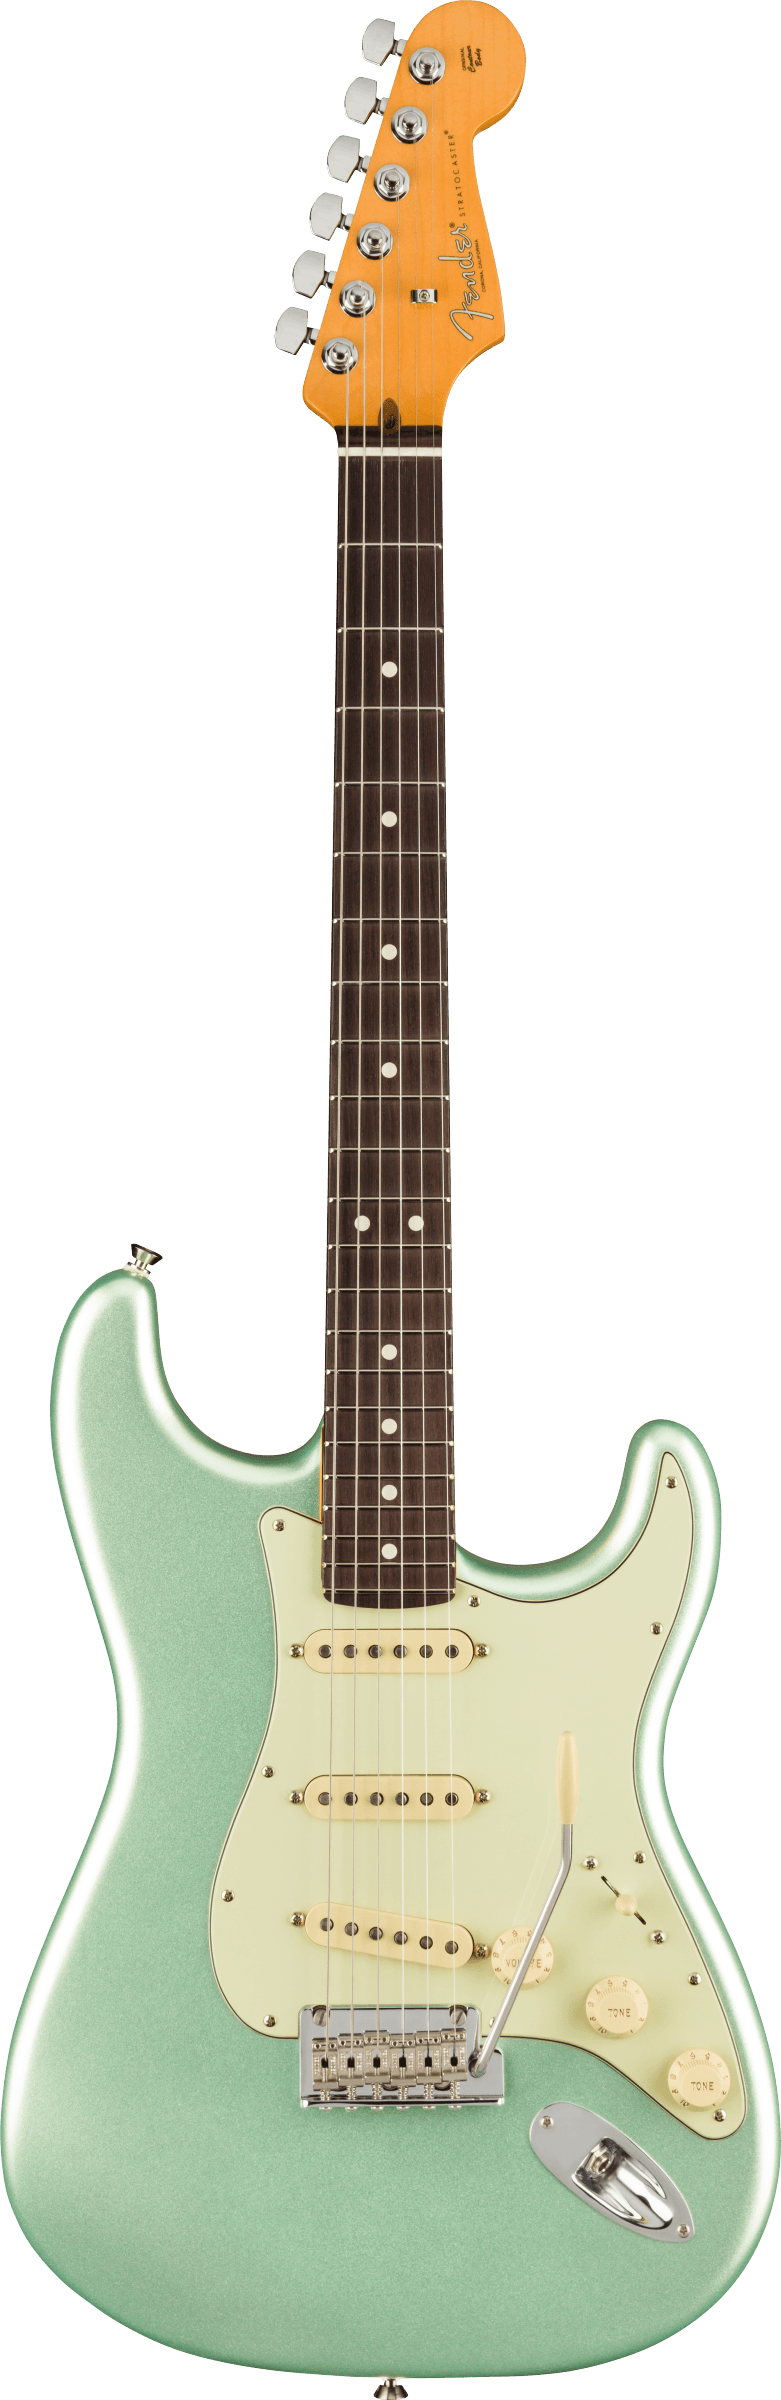 Fender Stratocaster electric guitar in Mystic Surf Green Tone Shop Guitars DFW